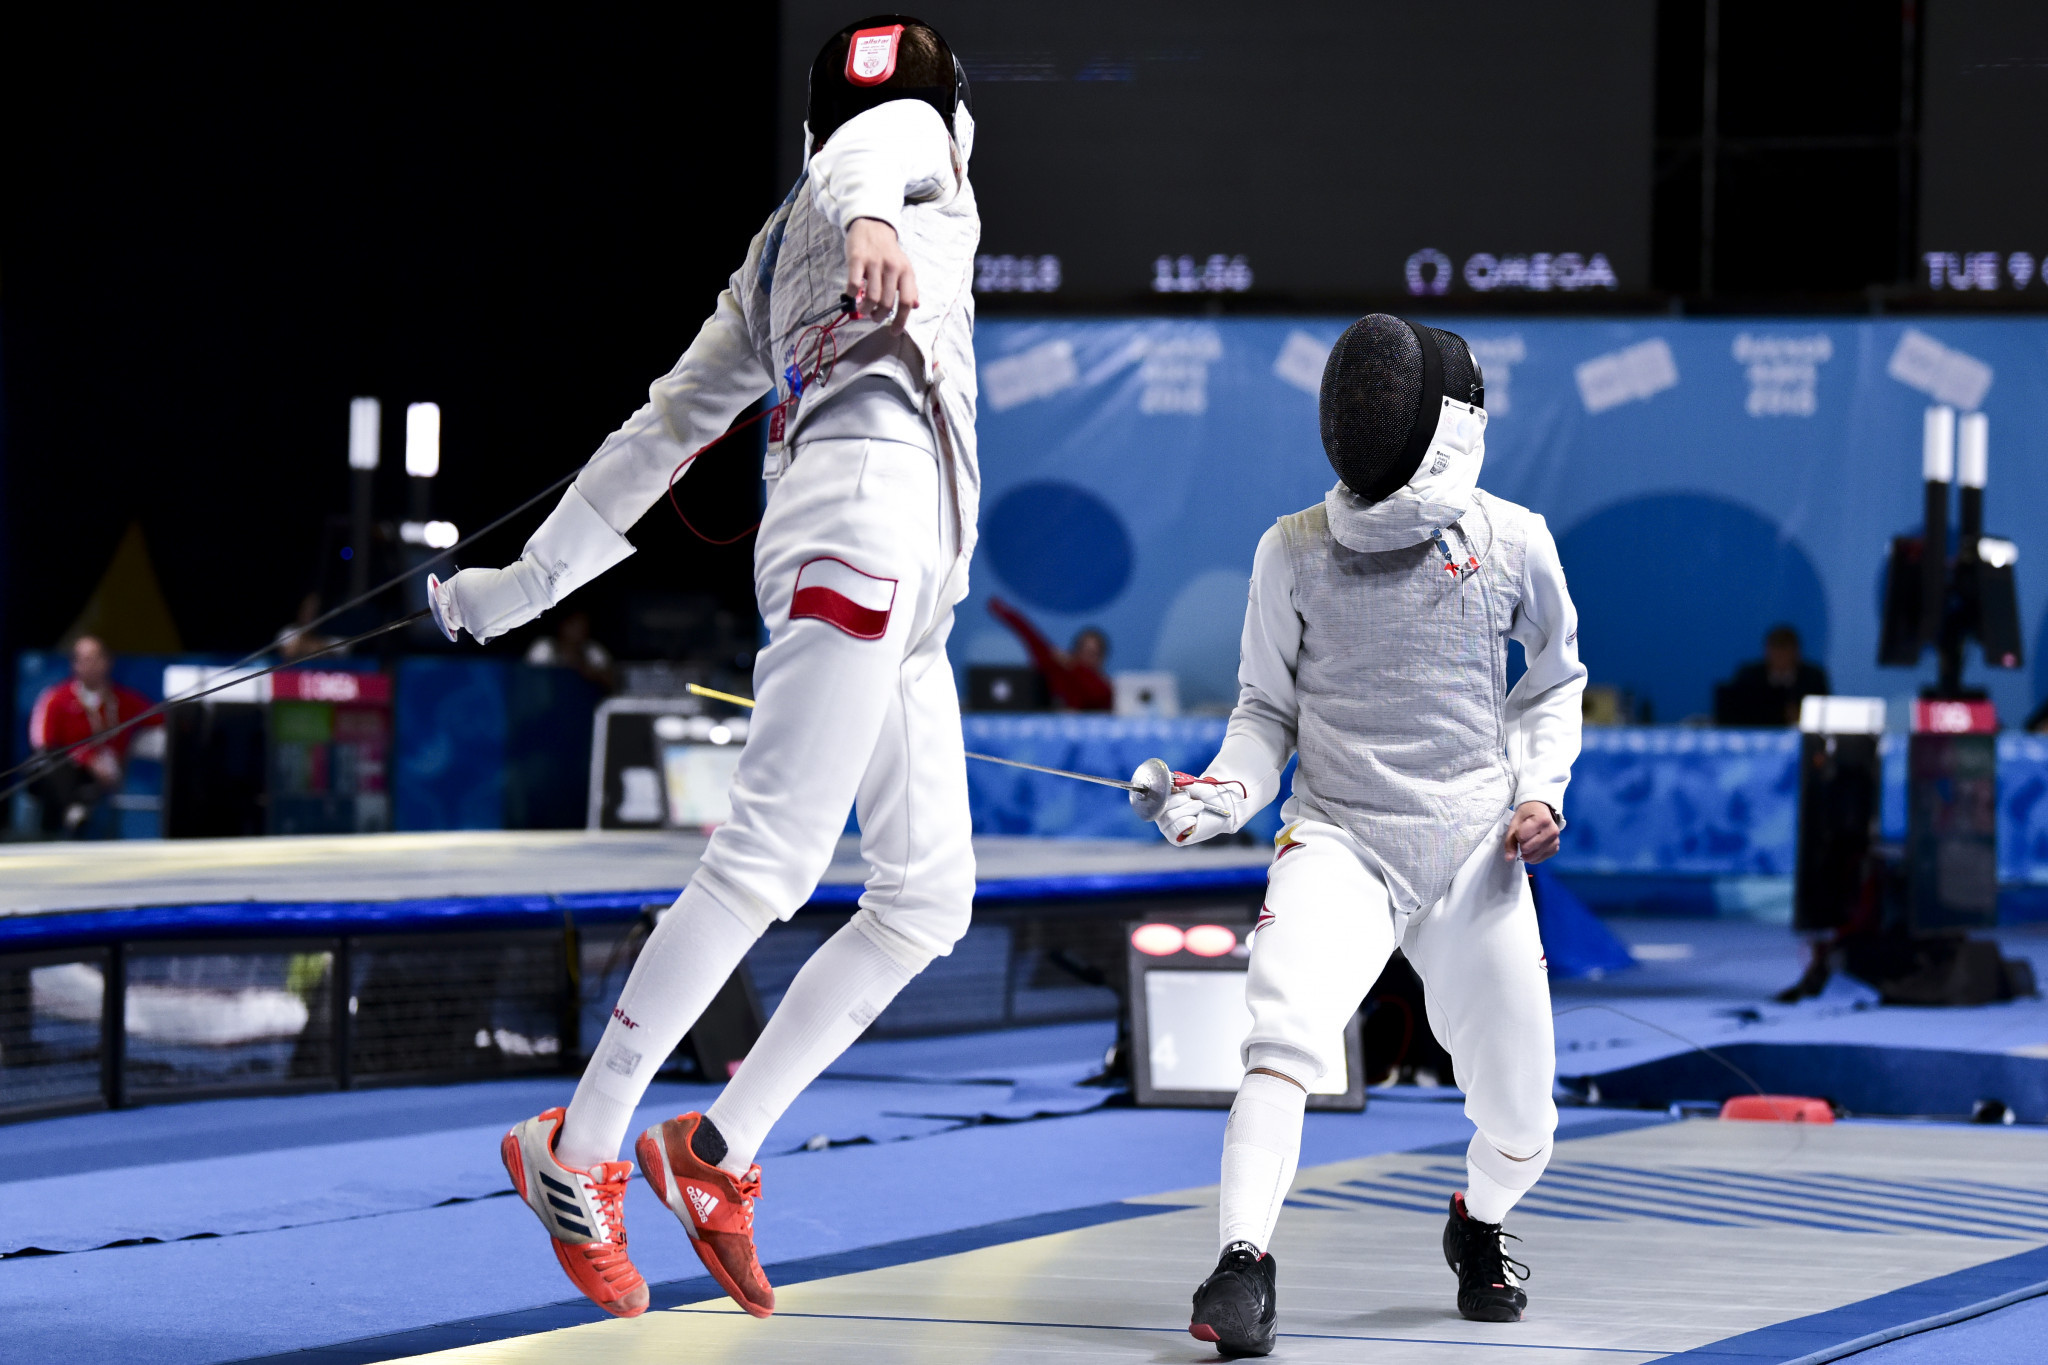 The penultimate day of fencing saw two gold medals on offer ©Getty Images